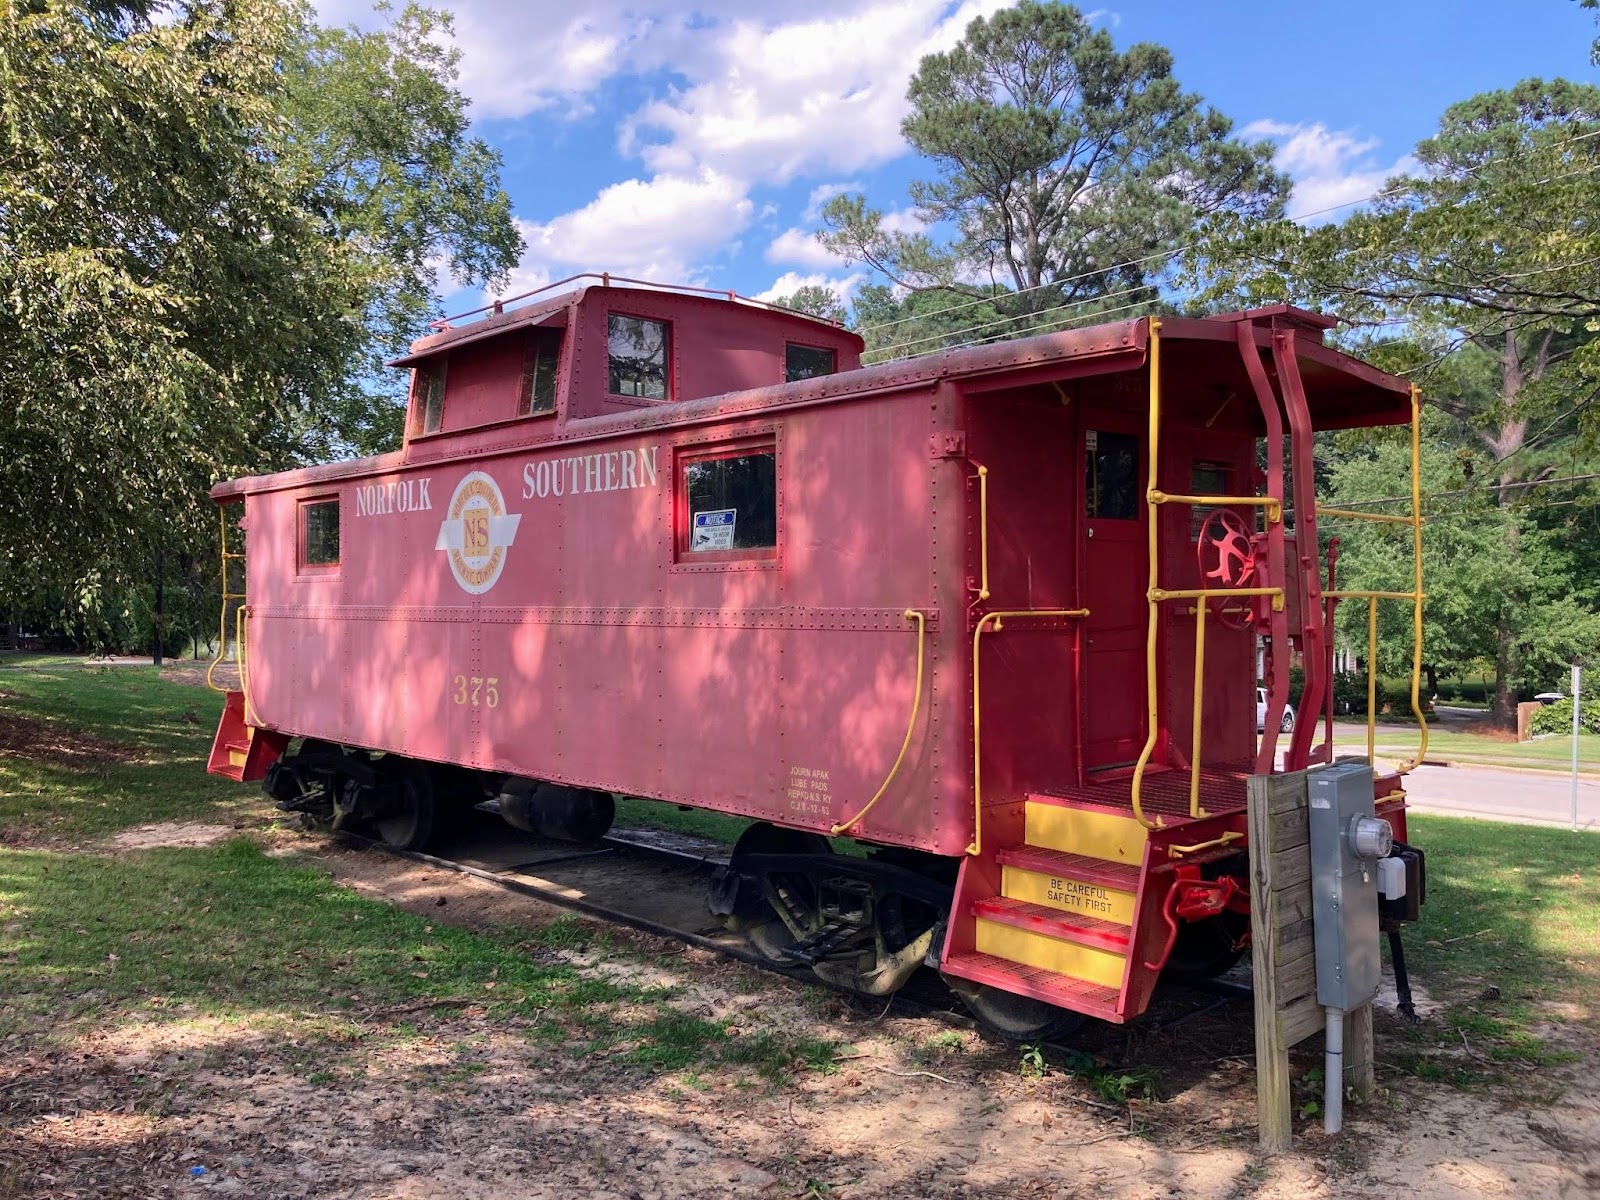 The red caboose in Fuquay is a favorite for kids living in Fuquay.